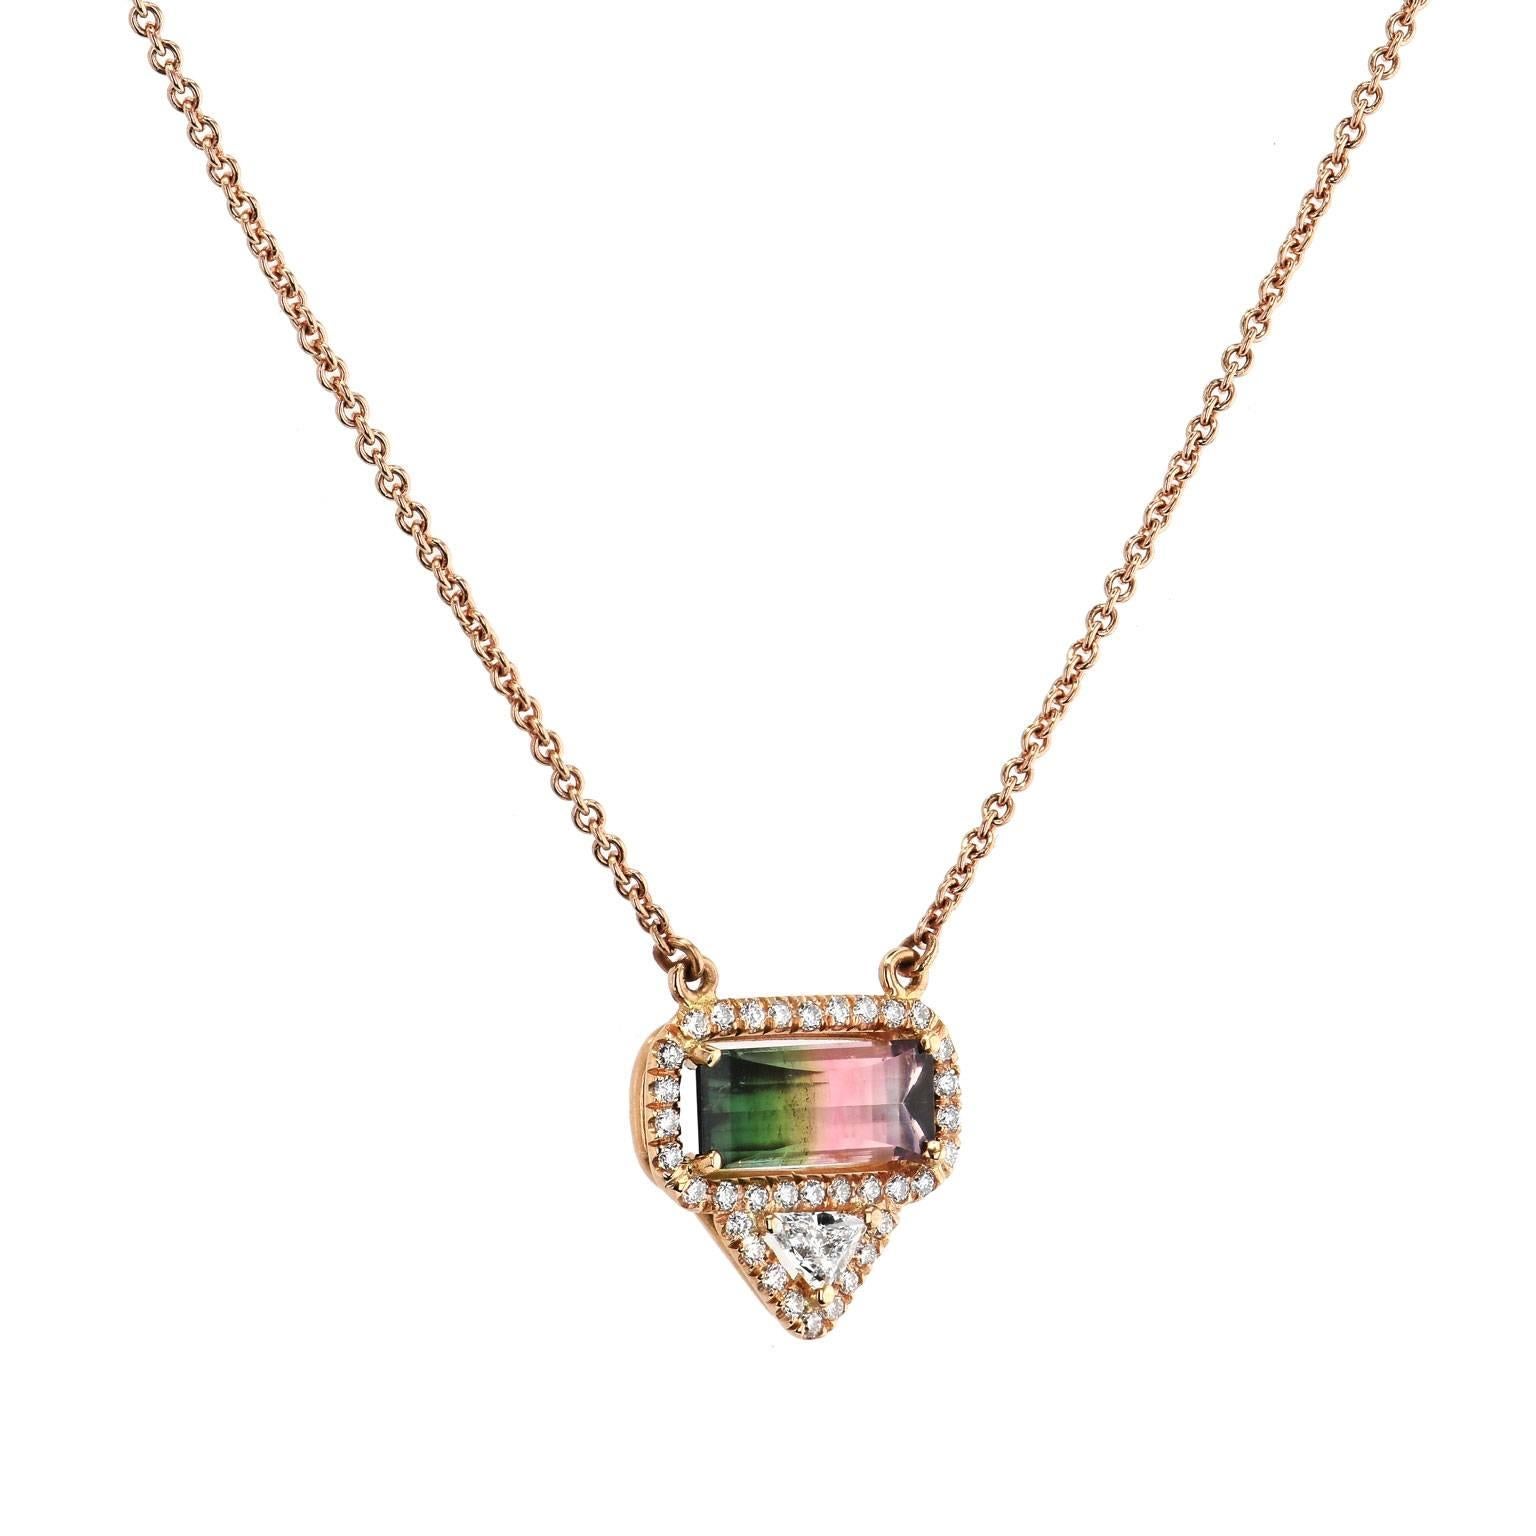 1.45 Bi-Color Tourmaline and Diamond Pave 18 karat Rose Gold Pendant Necklace

This is a one of a kind, handmade piece by H&H Jewels.

Bi-color tourmaline is funky and edgy in this handmade 18 karat rose gold pendant necklace. 1.45 carat of bi-color